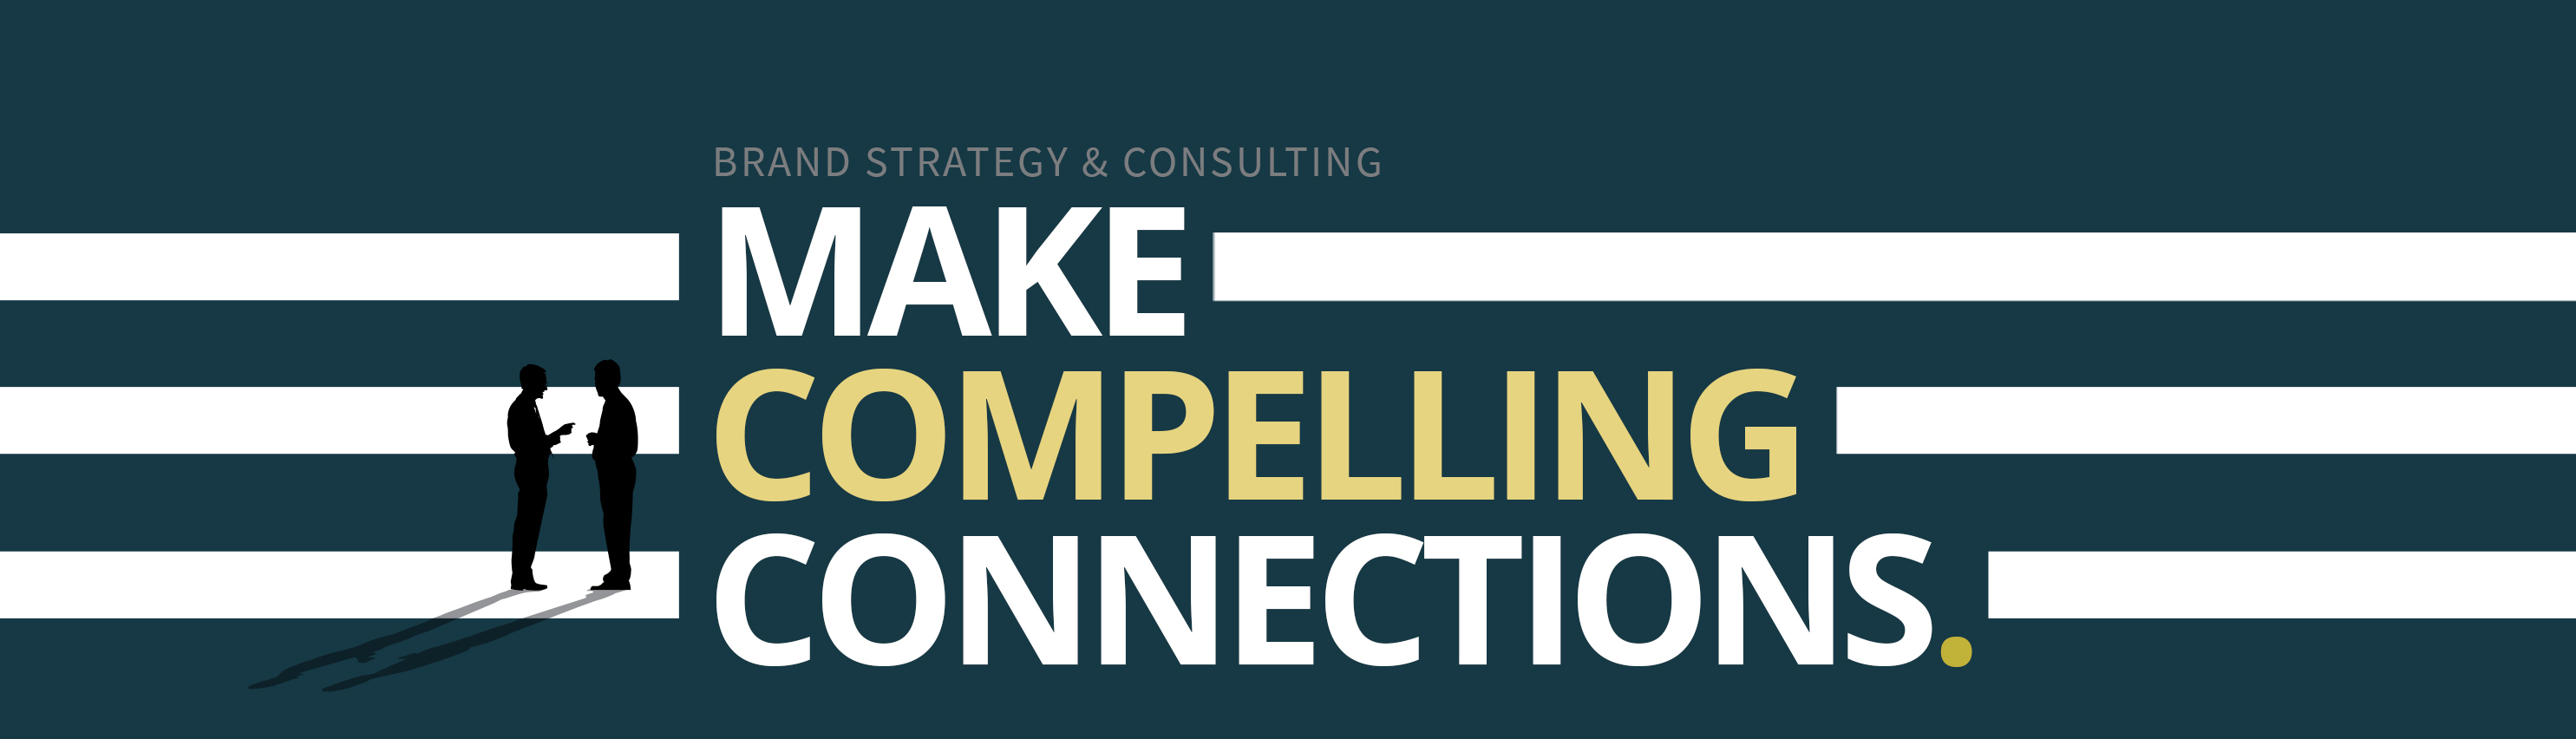 Make Compelling Connections | Brand Strategy & Consulting | Professional Research Consulting | Research Insights | Brand Strategy